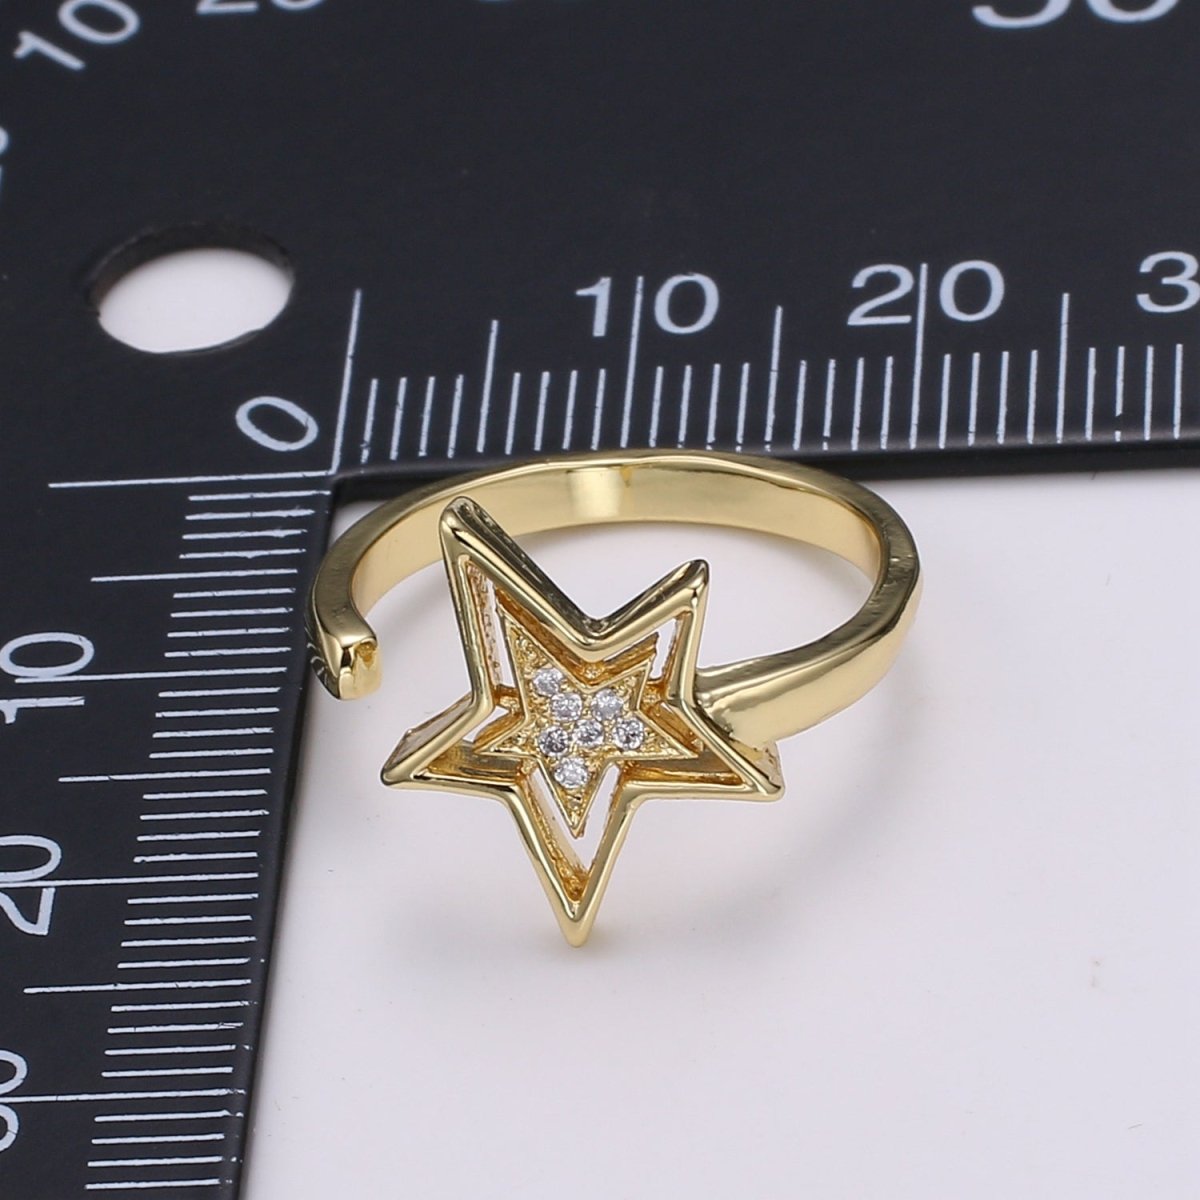 Dainty Star Ring 24K Gold Ring, CZ Celestial Ring Open Adjustable Gold Ring, Simple Gold Band R504 - DLUXCA